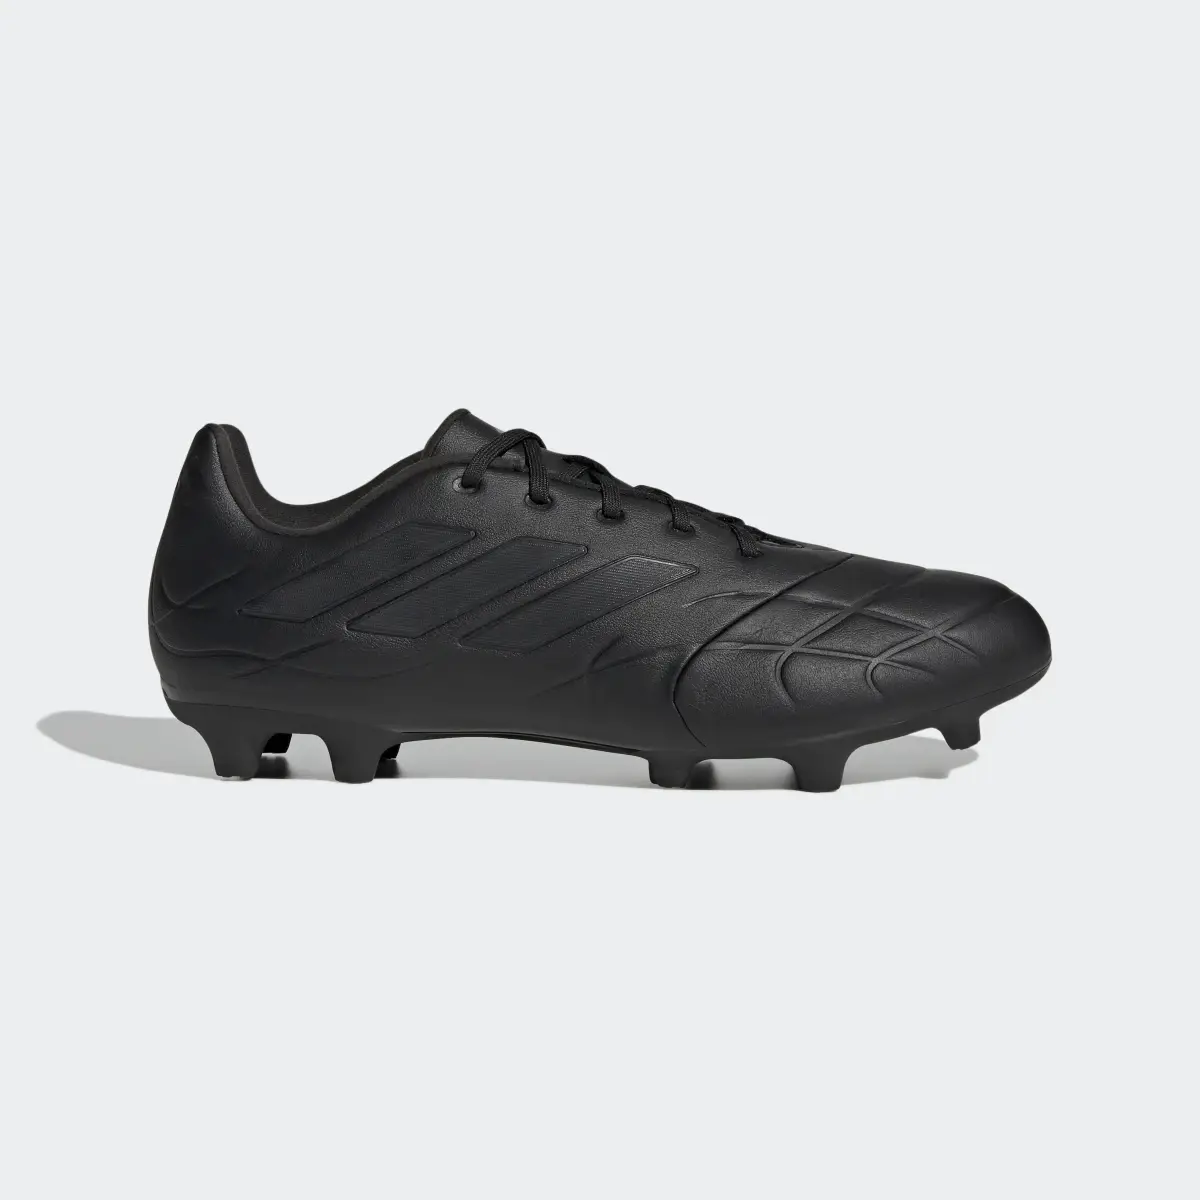 Adidas Copa Pure.3 Firm Ground Soccer Cleats. 2